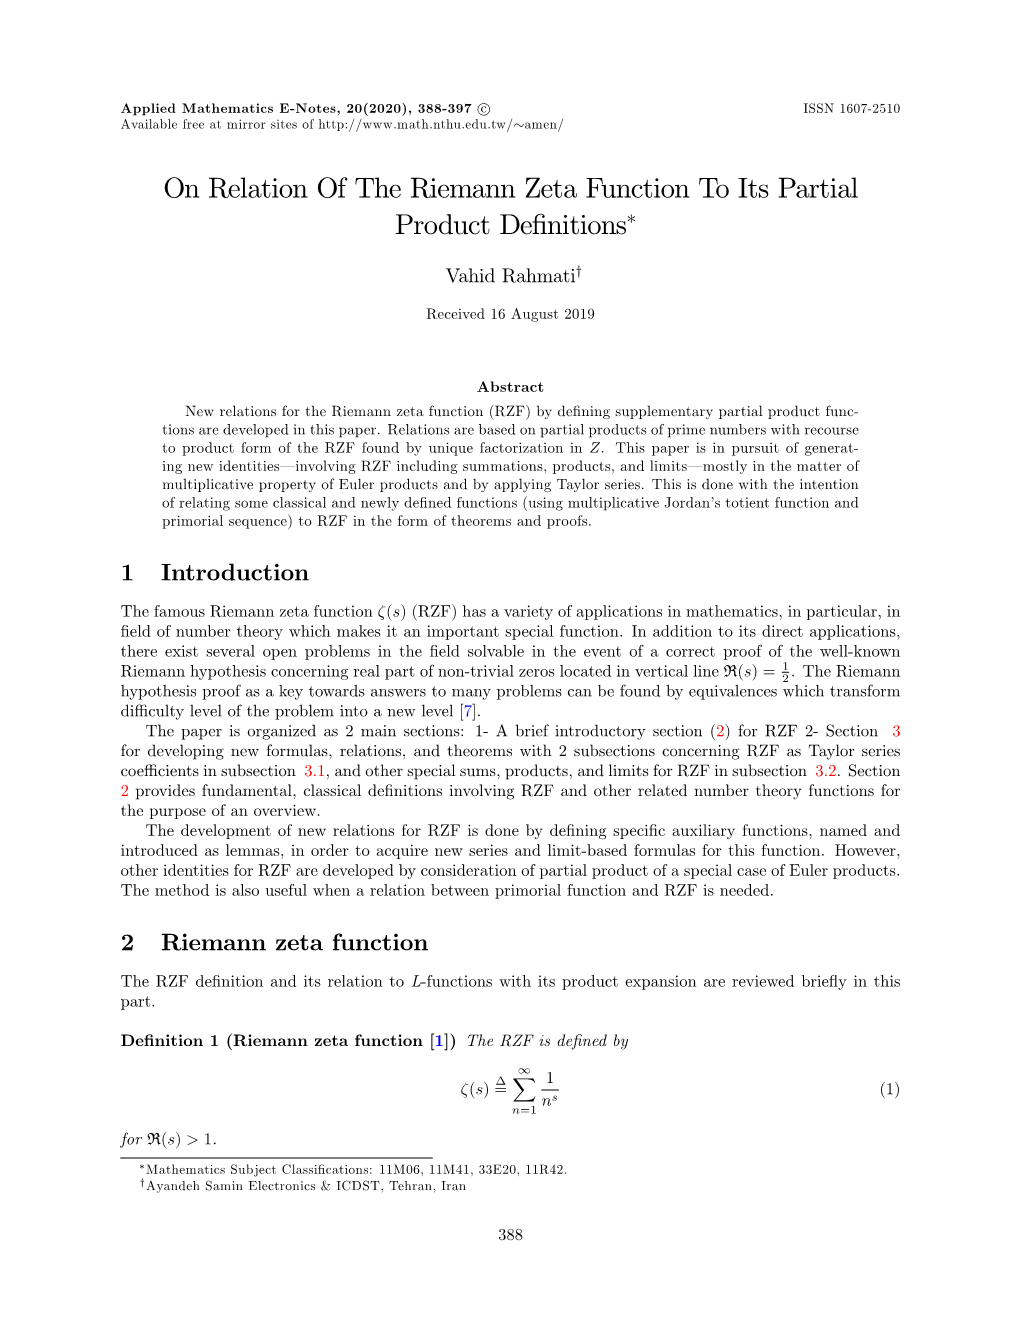 On Relation of the Riemann Zeta Function to Its Partial Product Deﬁnitions∗